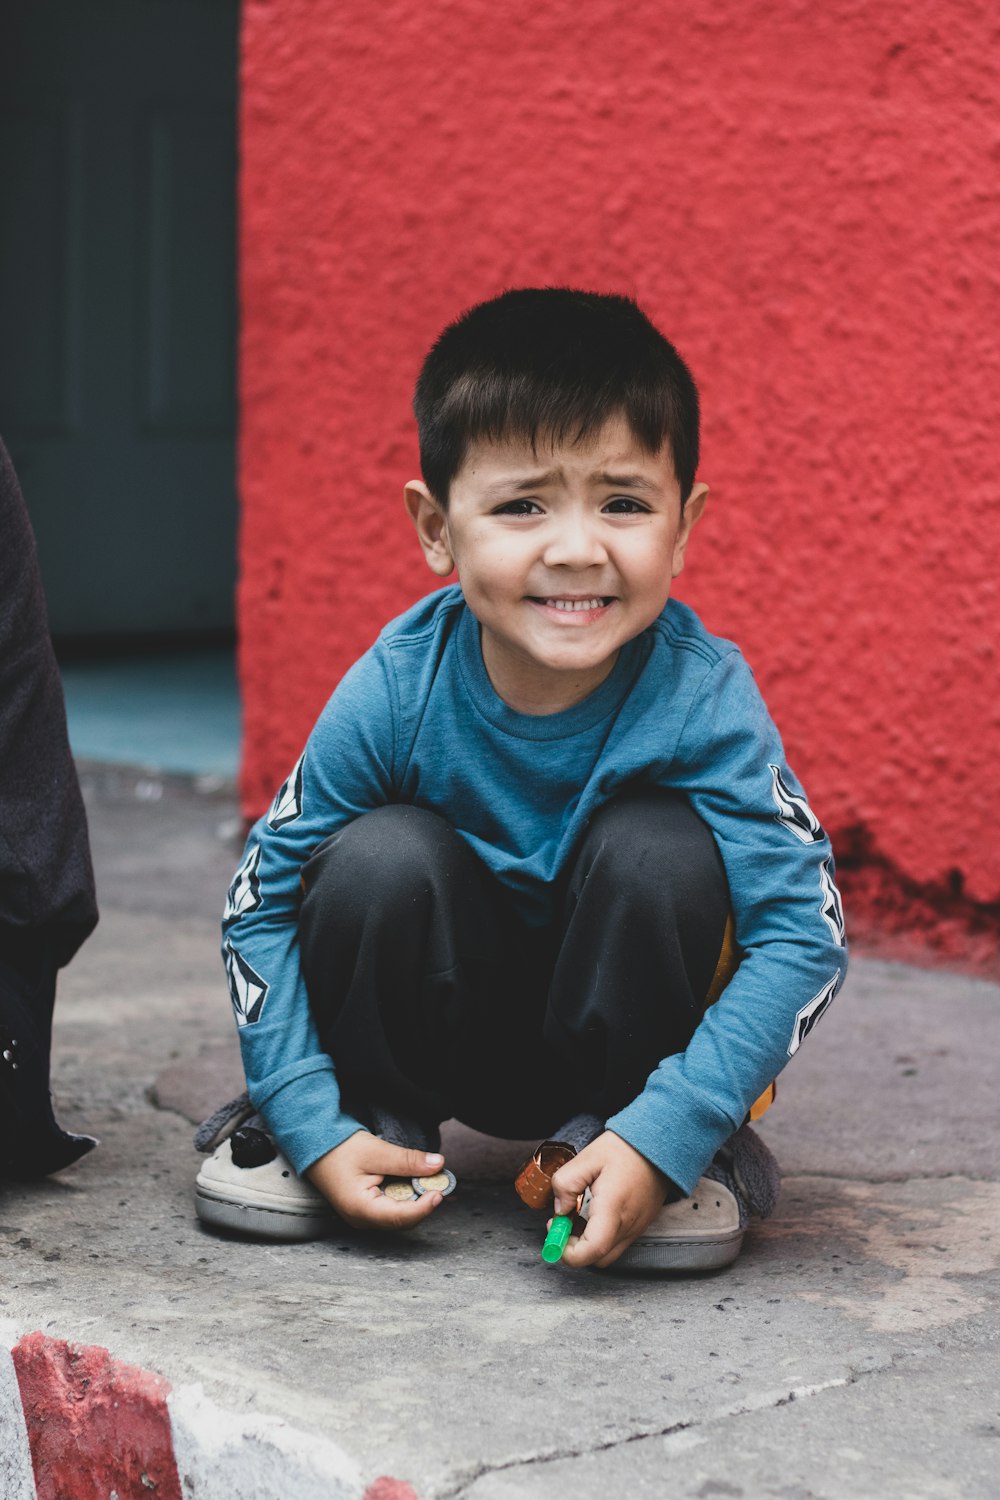 a young boy sitting on the ground smiling